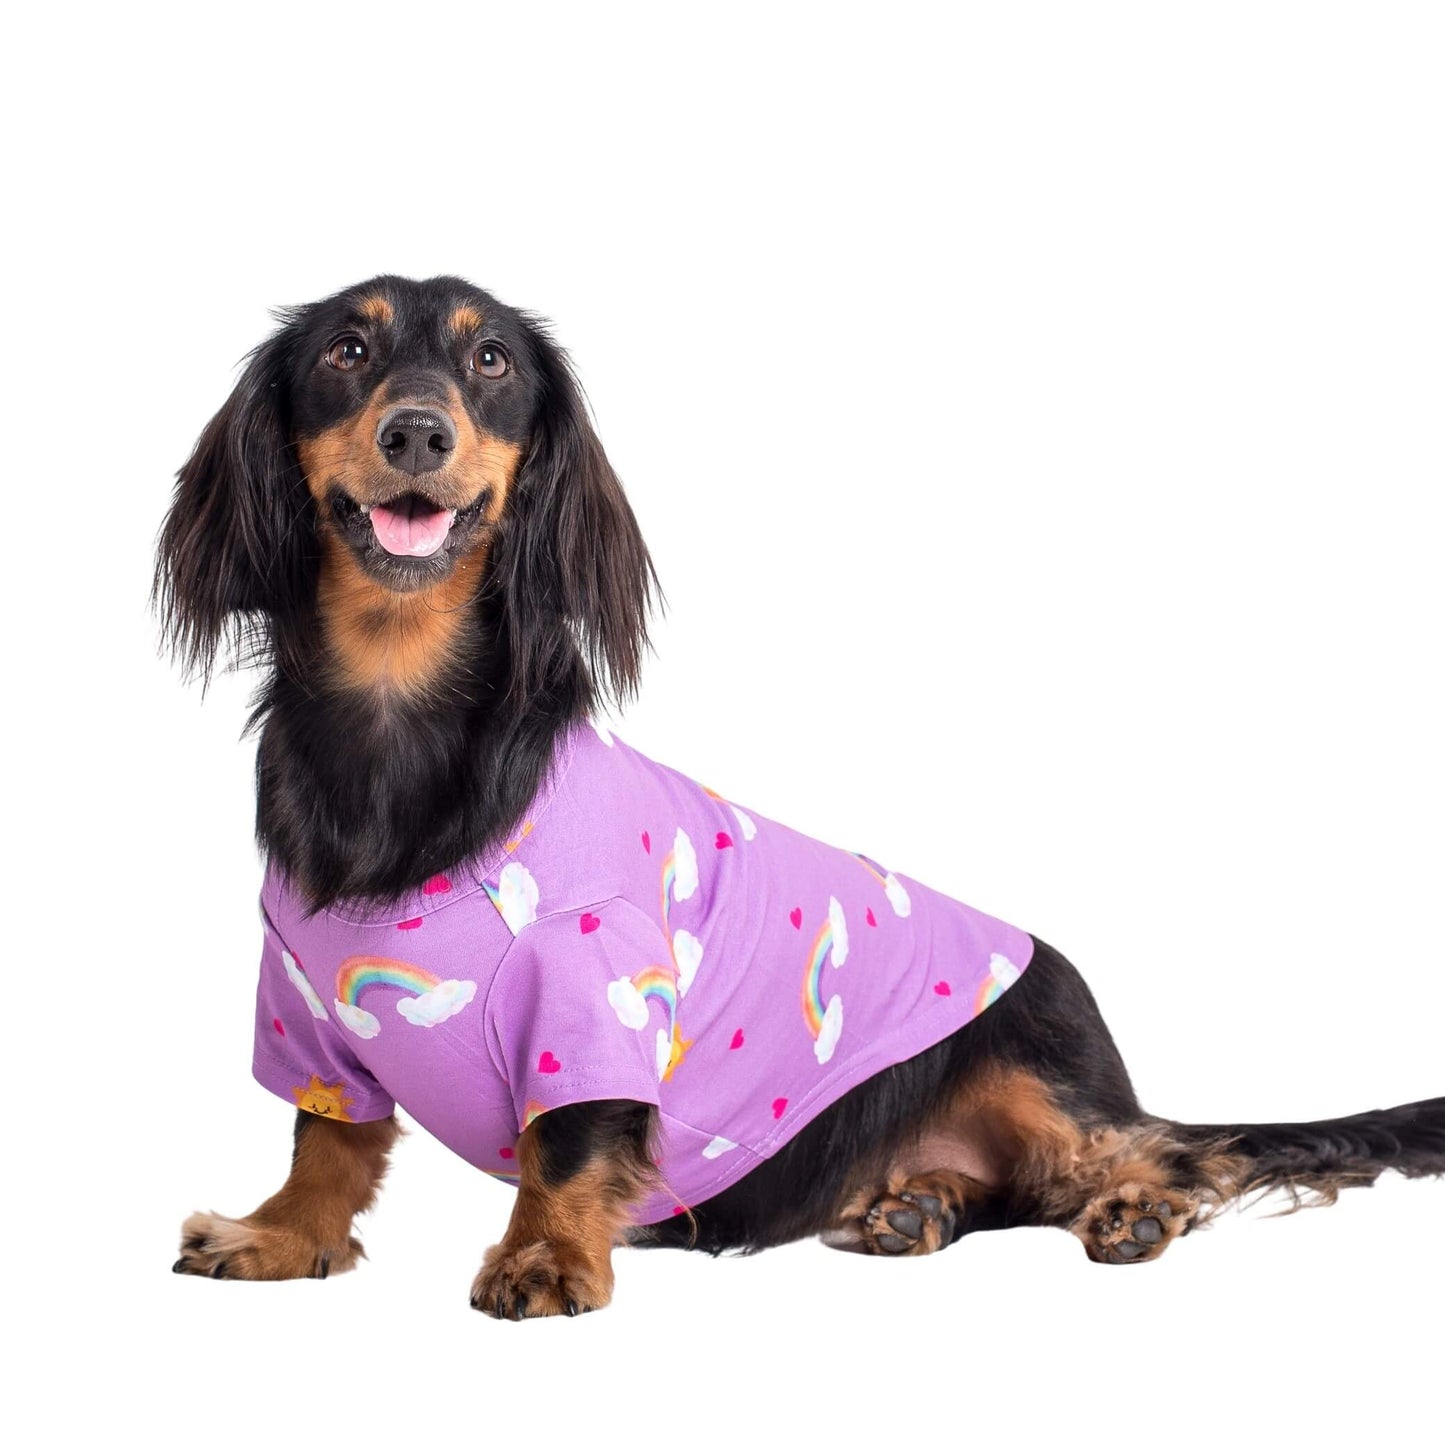 A Dachshund wearing Chasing Rainbows dog pyjamas made by Vibrant Hound. The Chasing Rainbows pyjama for dogs is purple, with rainbows, clouds, and red love hearts printed on it.